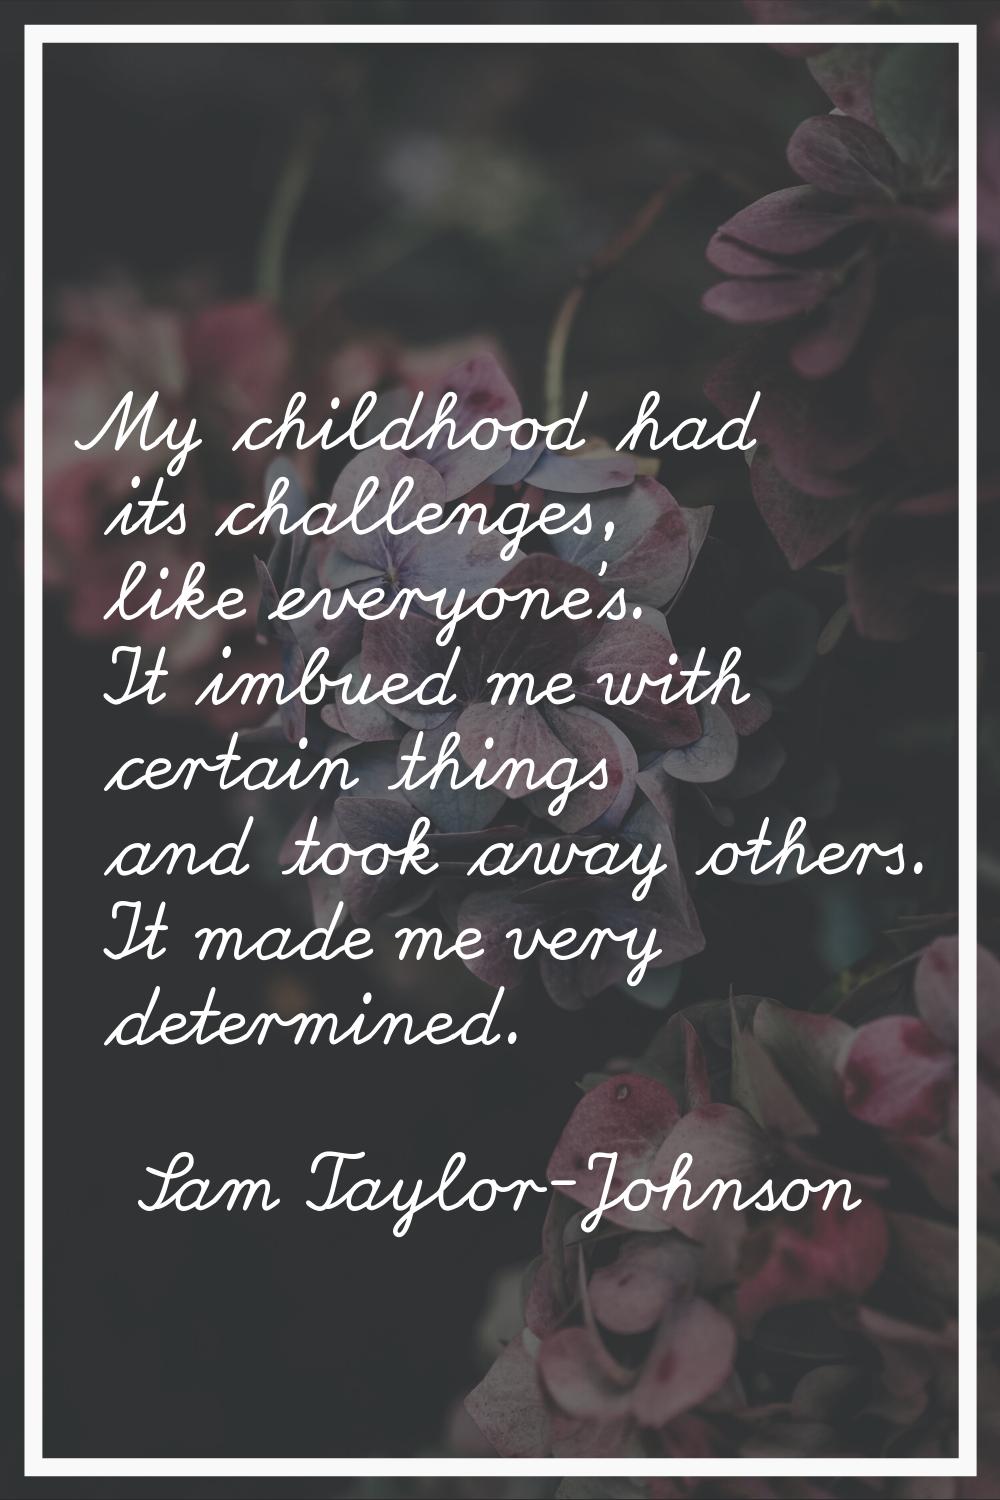 My childhood had its challenges, like everyone's. It imbued me with certain things and took away ot